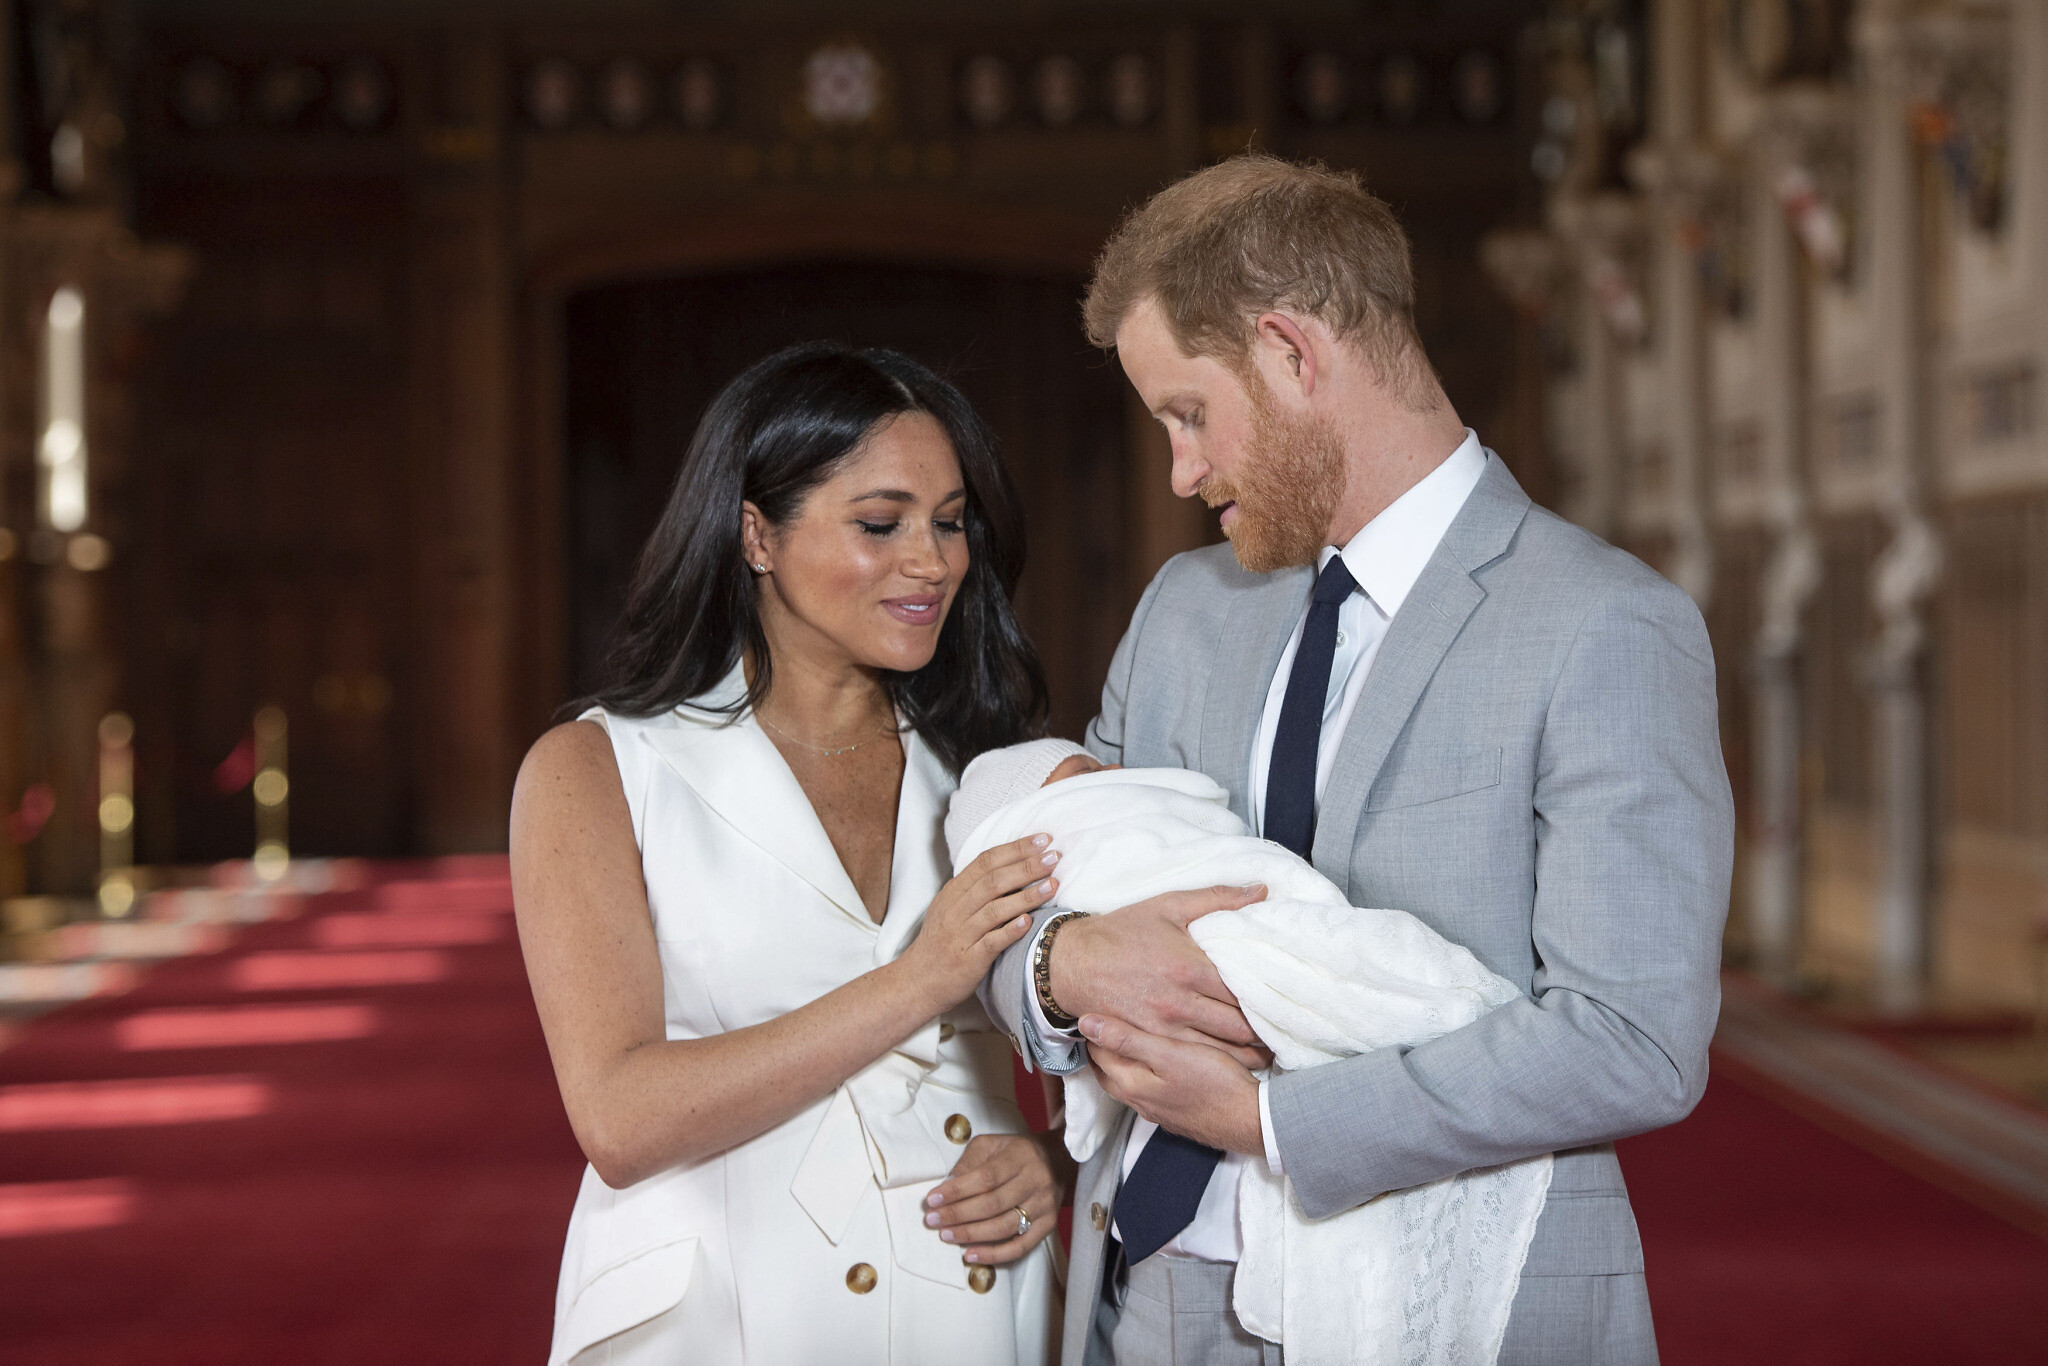 Prince Harry and Meghan Markle’s Children Archie and Lilibet Voyage